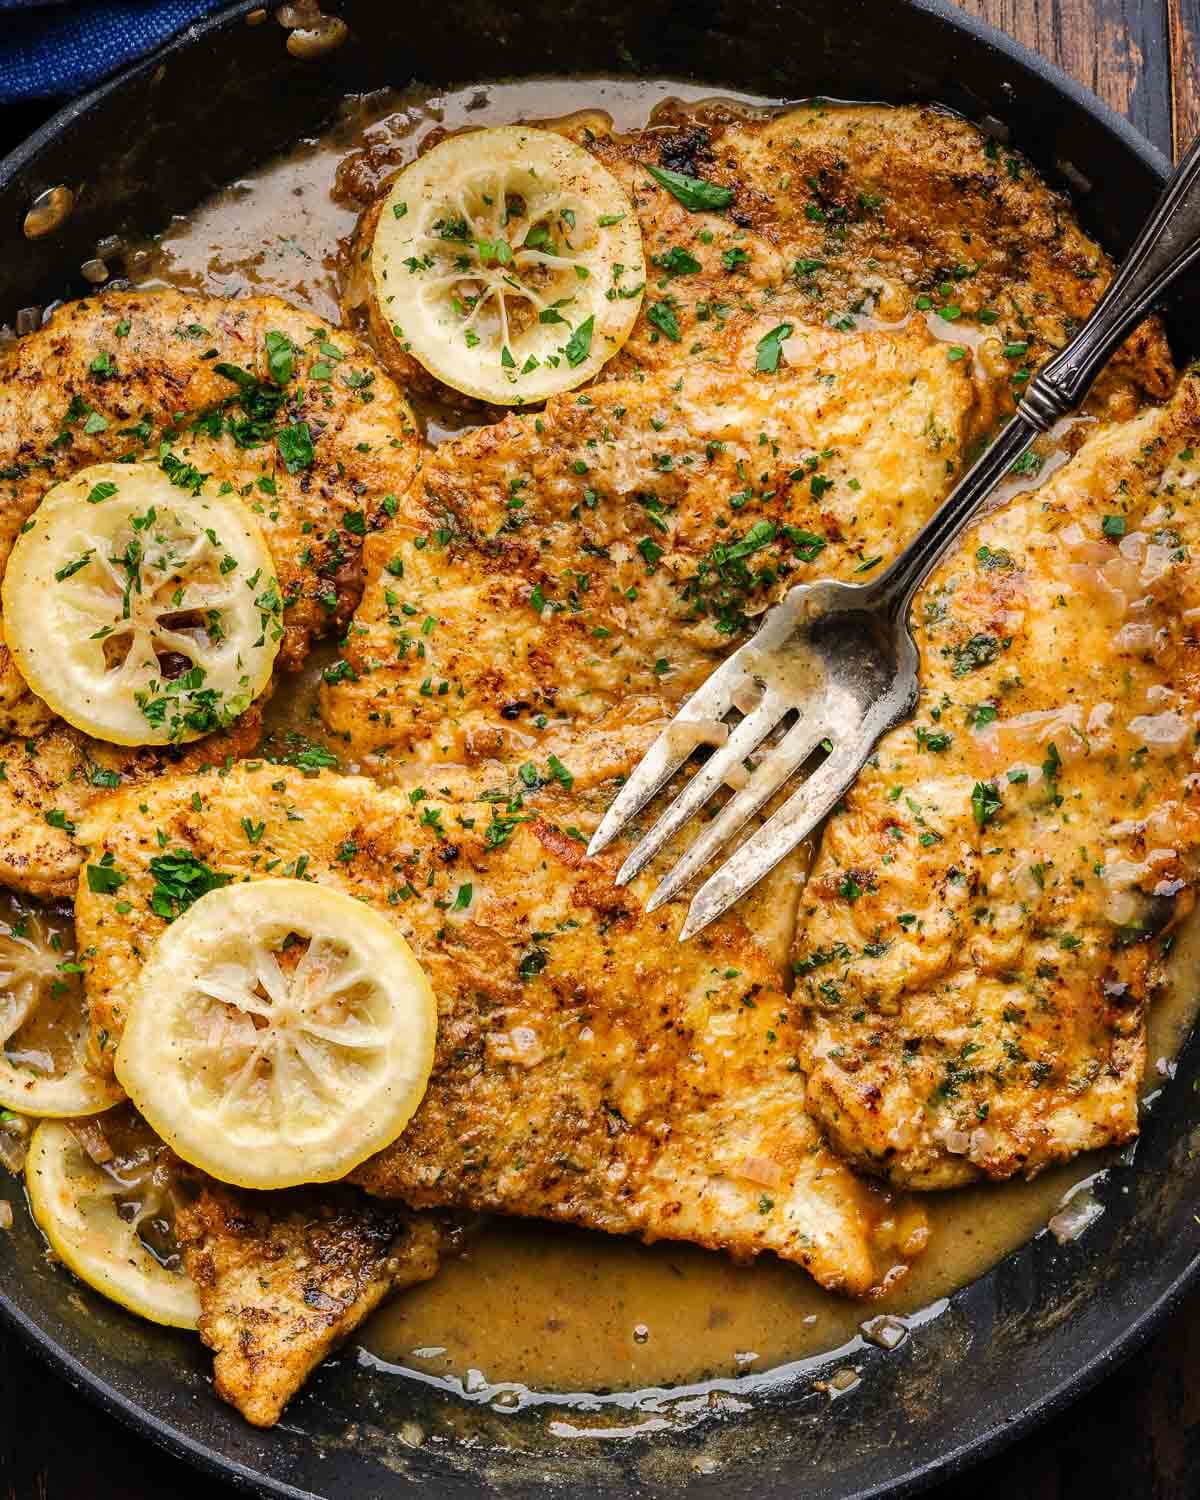 Chicken Francese in black pan with lemon slices.